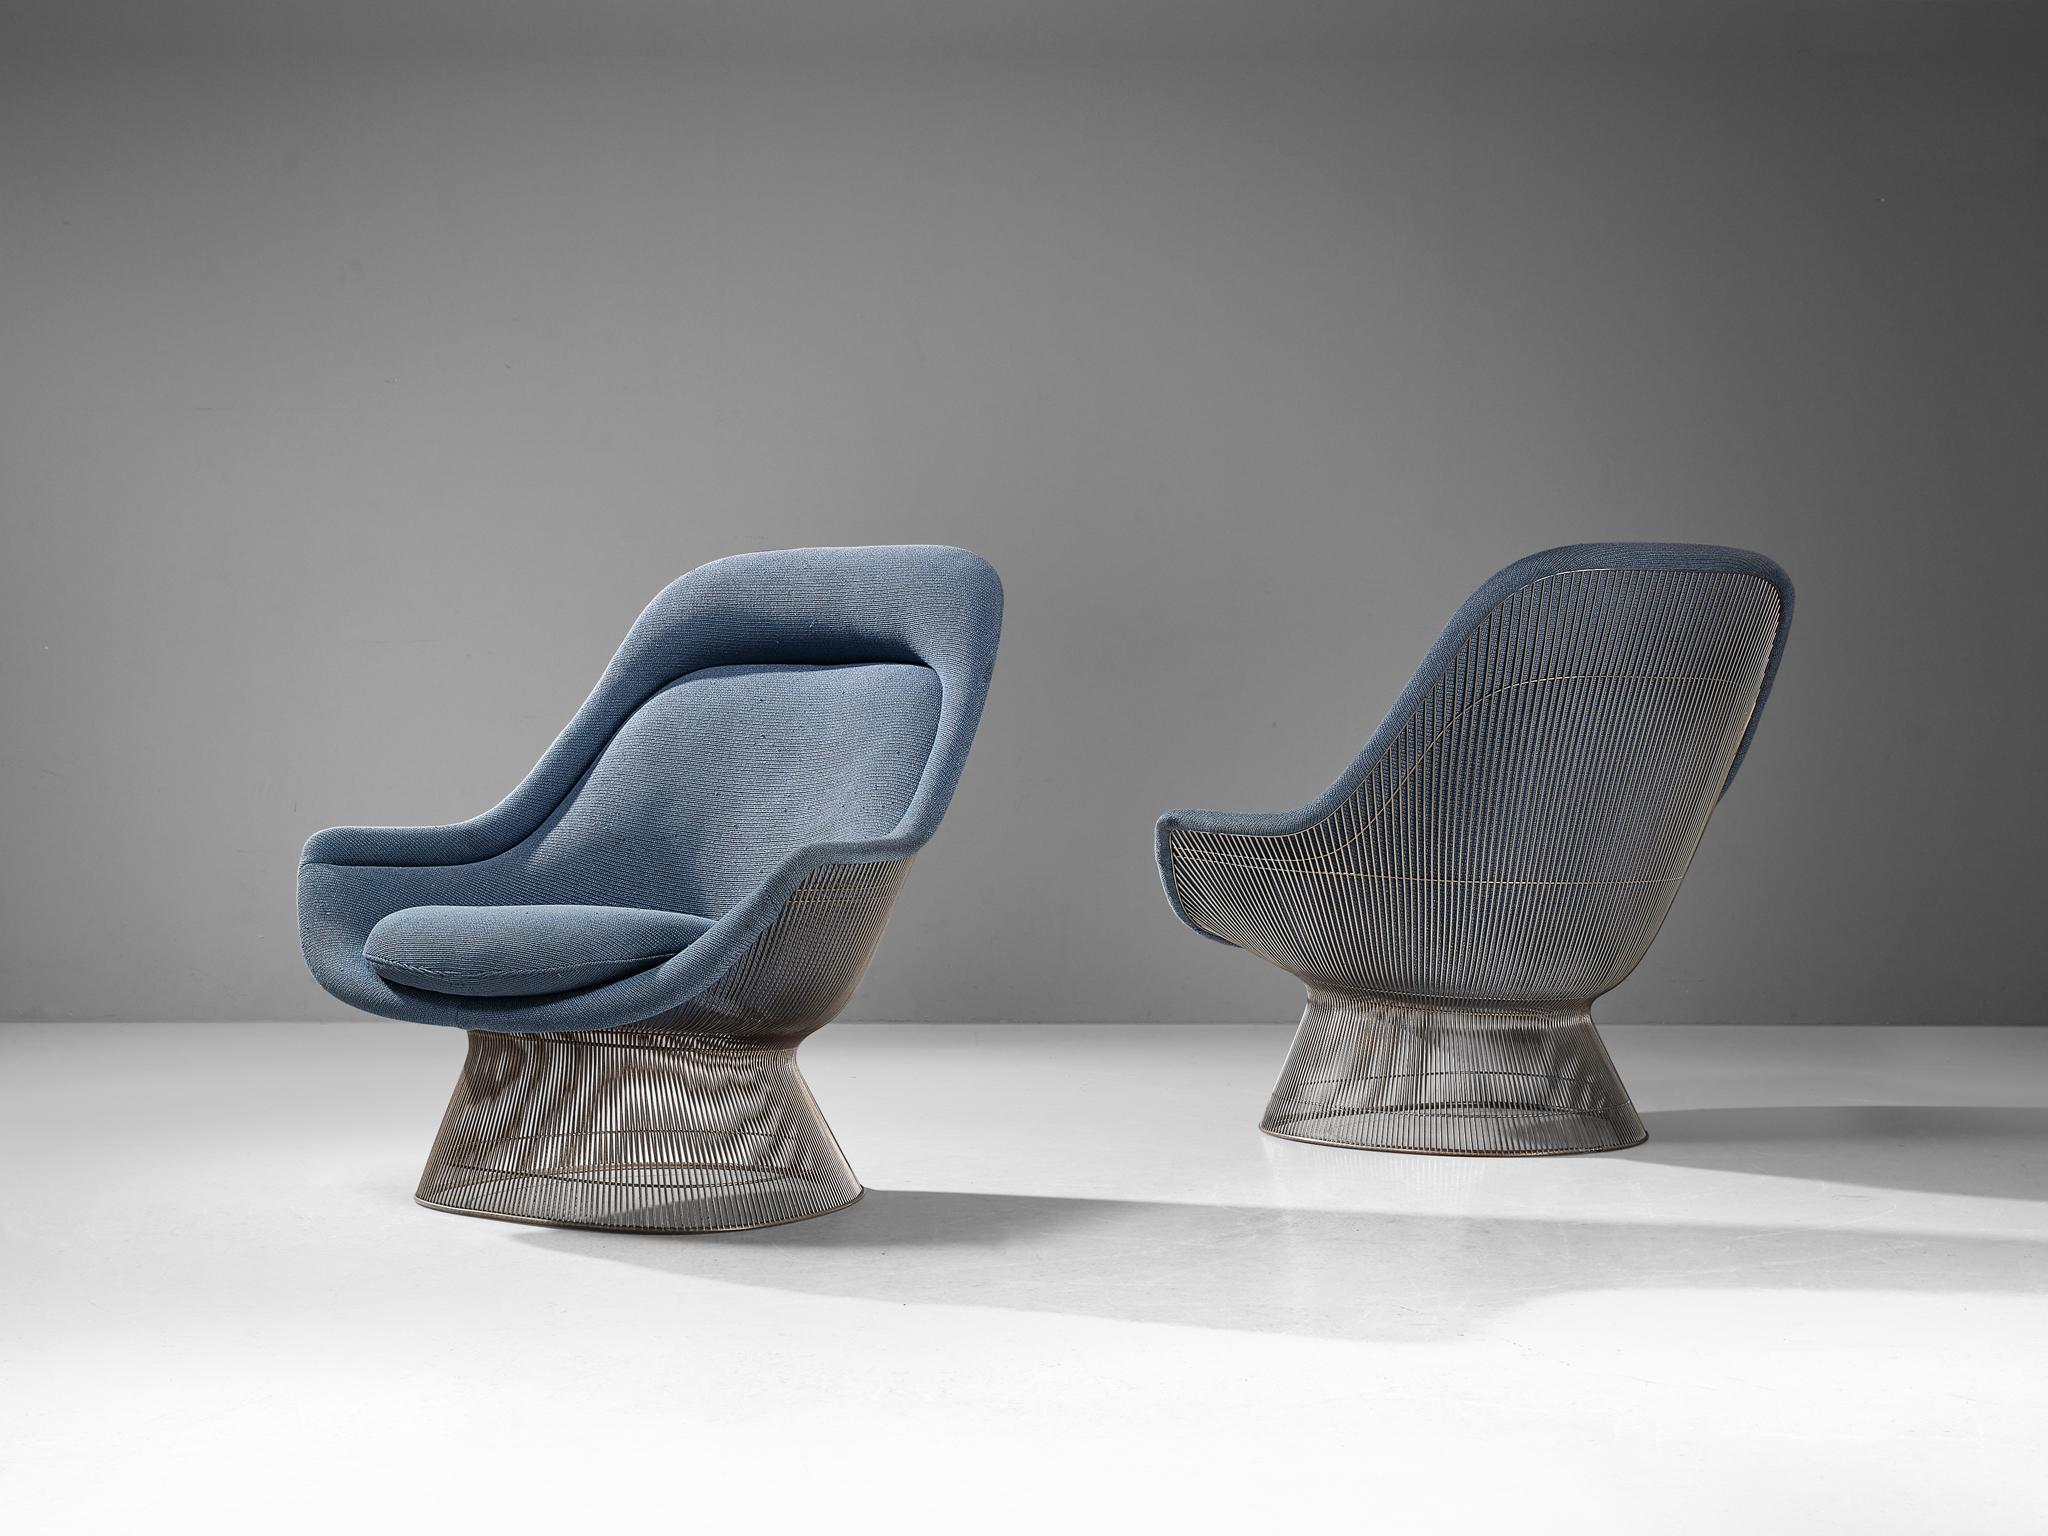 Warren Platner for Knoll, pair of lounge chairs, 'model 1705', nickel-plated steel, fabric, United States, design 1966

This iconic easy chair by Warren Platner is created by welding curved steel rods to circular and semi-circular frames,